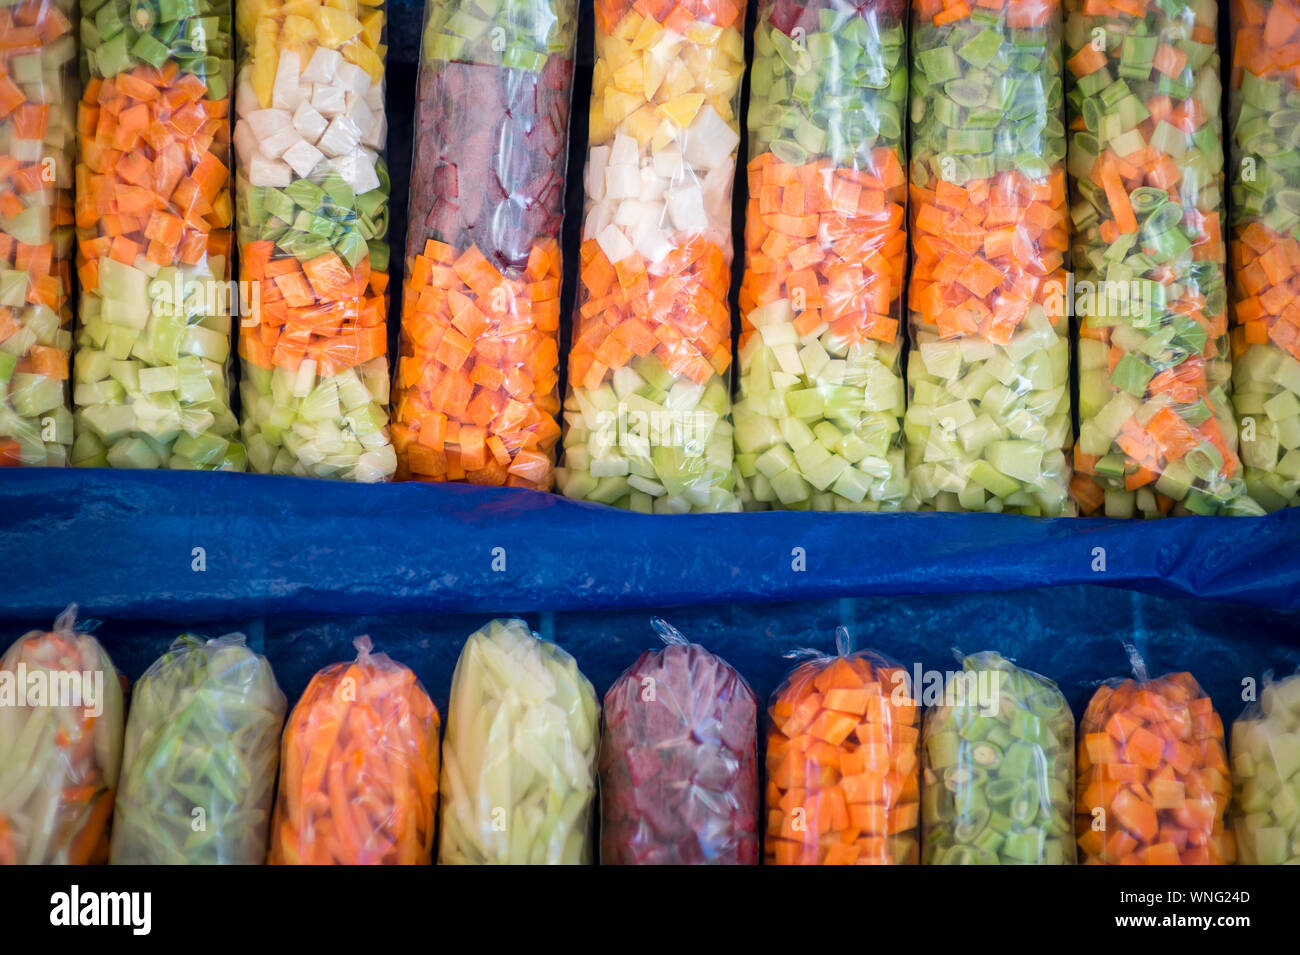 Full frame close-up of colorful sacks of fresh grated vegetables on display at a farmers market in Rio de Janeiro, Brazil Stock Photo